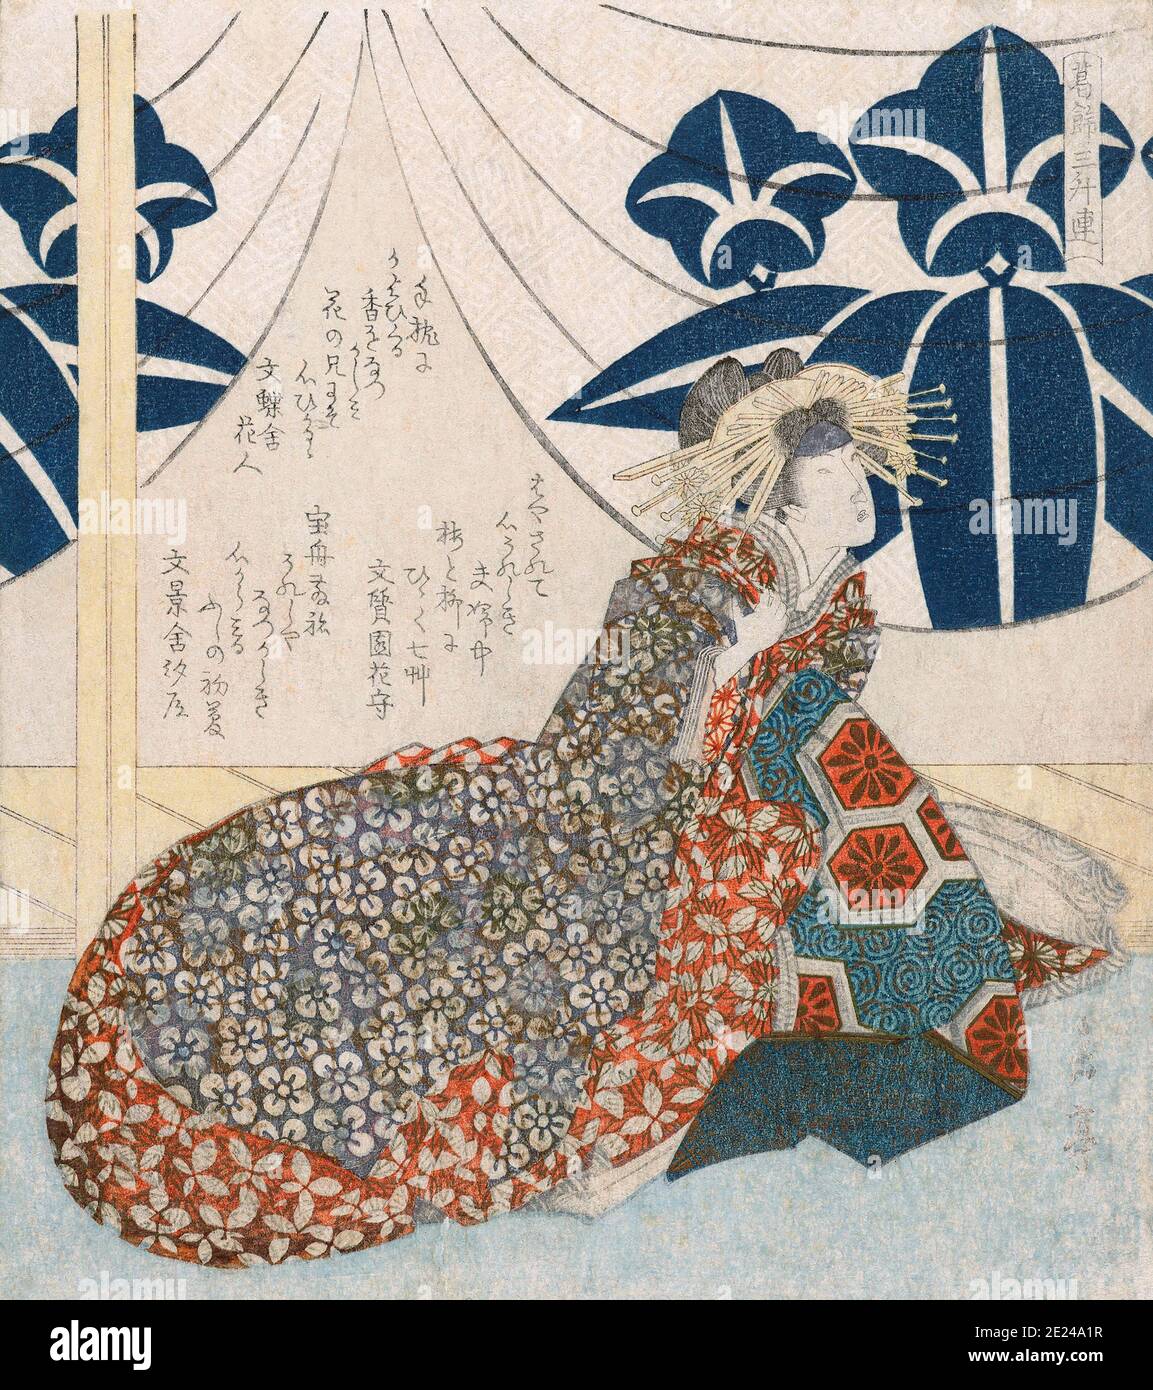 Japan: Woodblock print of the actor Segawa Kikunojo V (1802-1832) in the role of the courtesan Oiso no Tora, by Yashima Gakutei (1786-1868), 1823, Rikjsmuseum, Amsterdam. Yashima Gakutei was a Japanese artist and poet of the 19th century. Born in Osaka, Gakutei was the illegitimate son of a samurai, and spent much of his early life working on woodblock prints in Osaka. He eventually studied under renowned woodblock printers Totoya Hokkei and Hokusai. Stock Photo